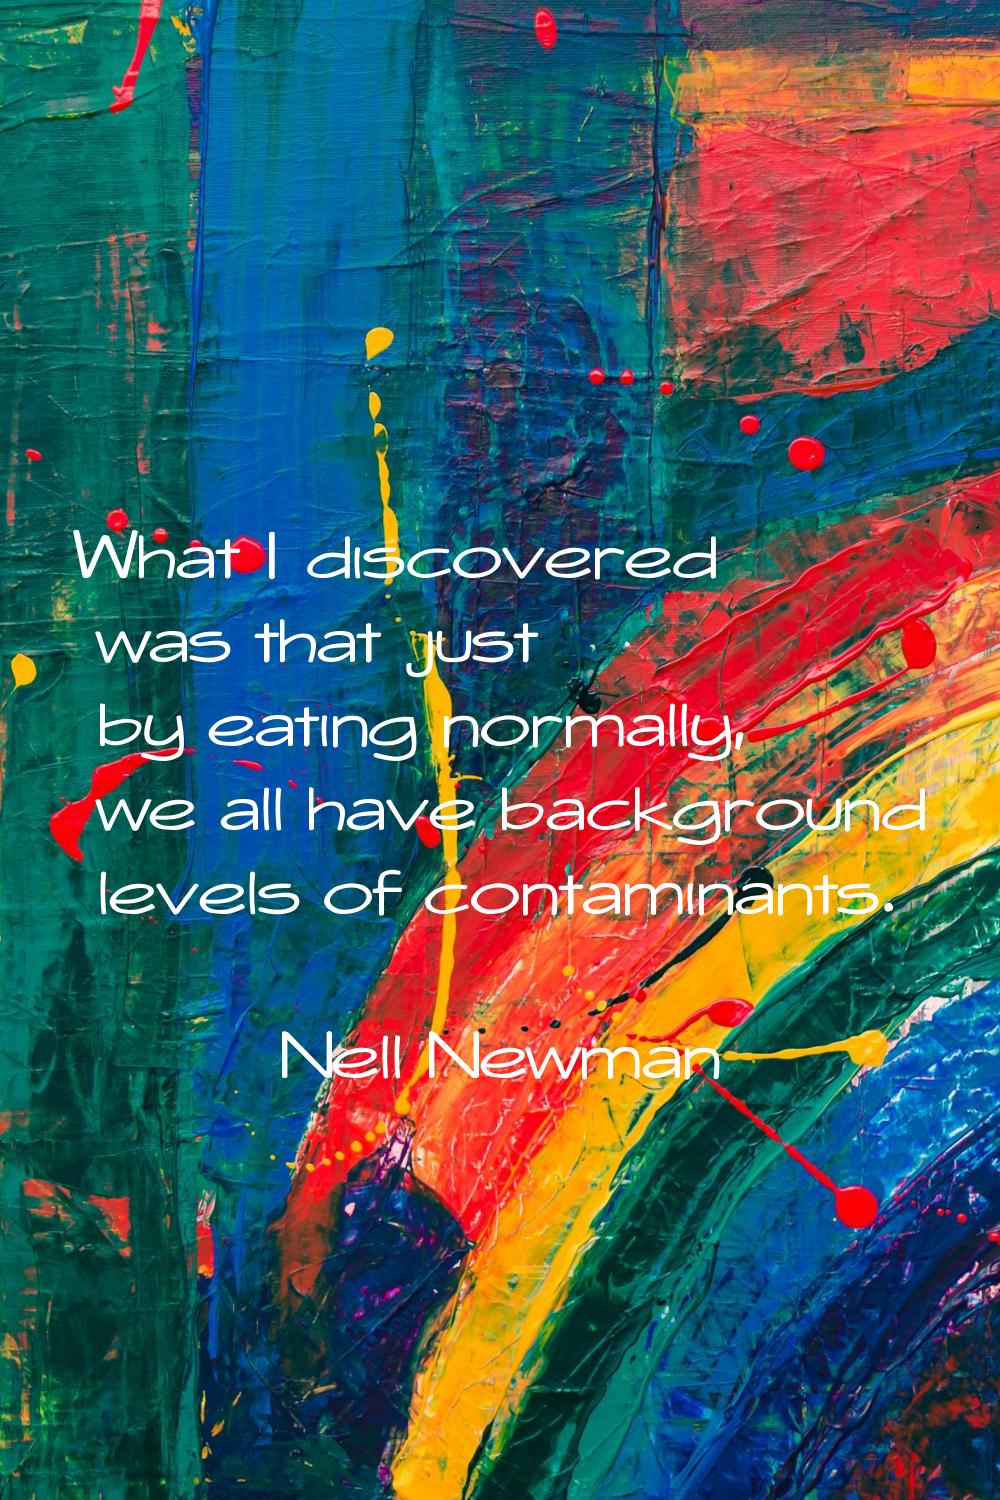 What I discovered was that just by eating normally, we all have background levels of contaminants.